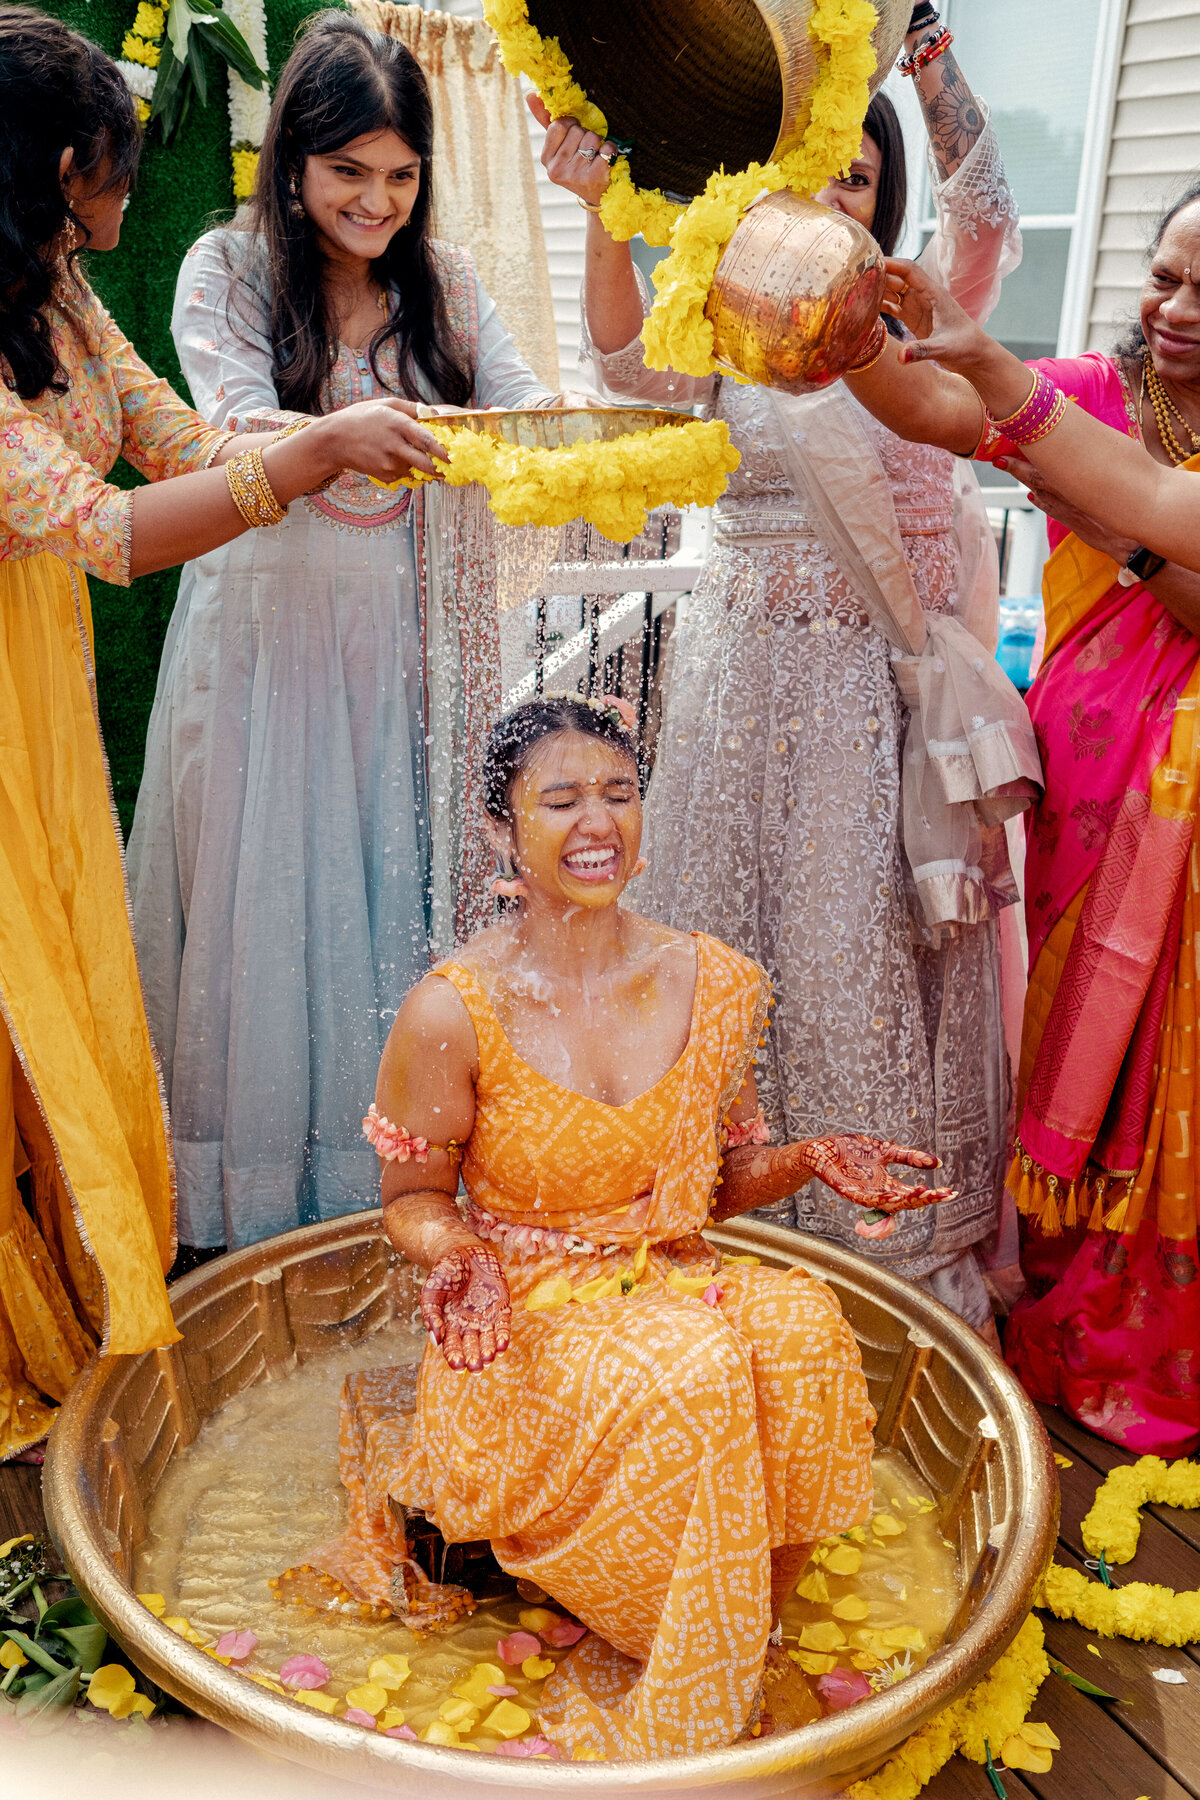 A bride is being showered after her haldi ceremony.  She is wearing a yellow gown  and is smiling while water is sprinkled on her